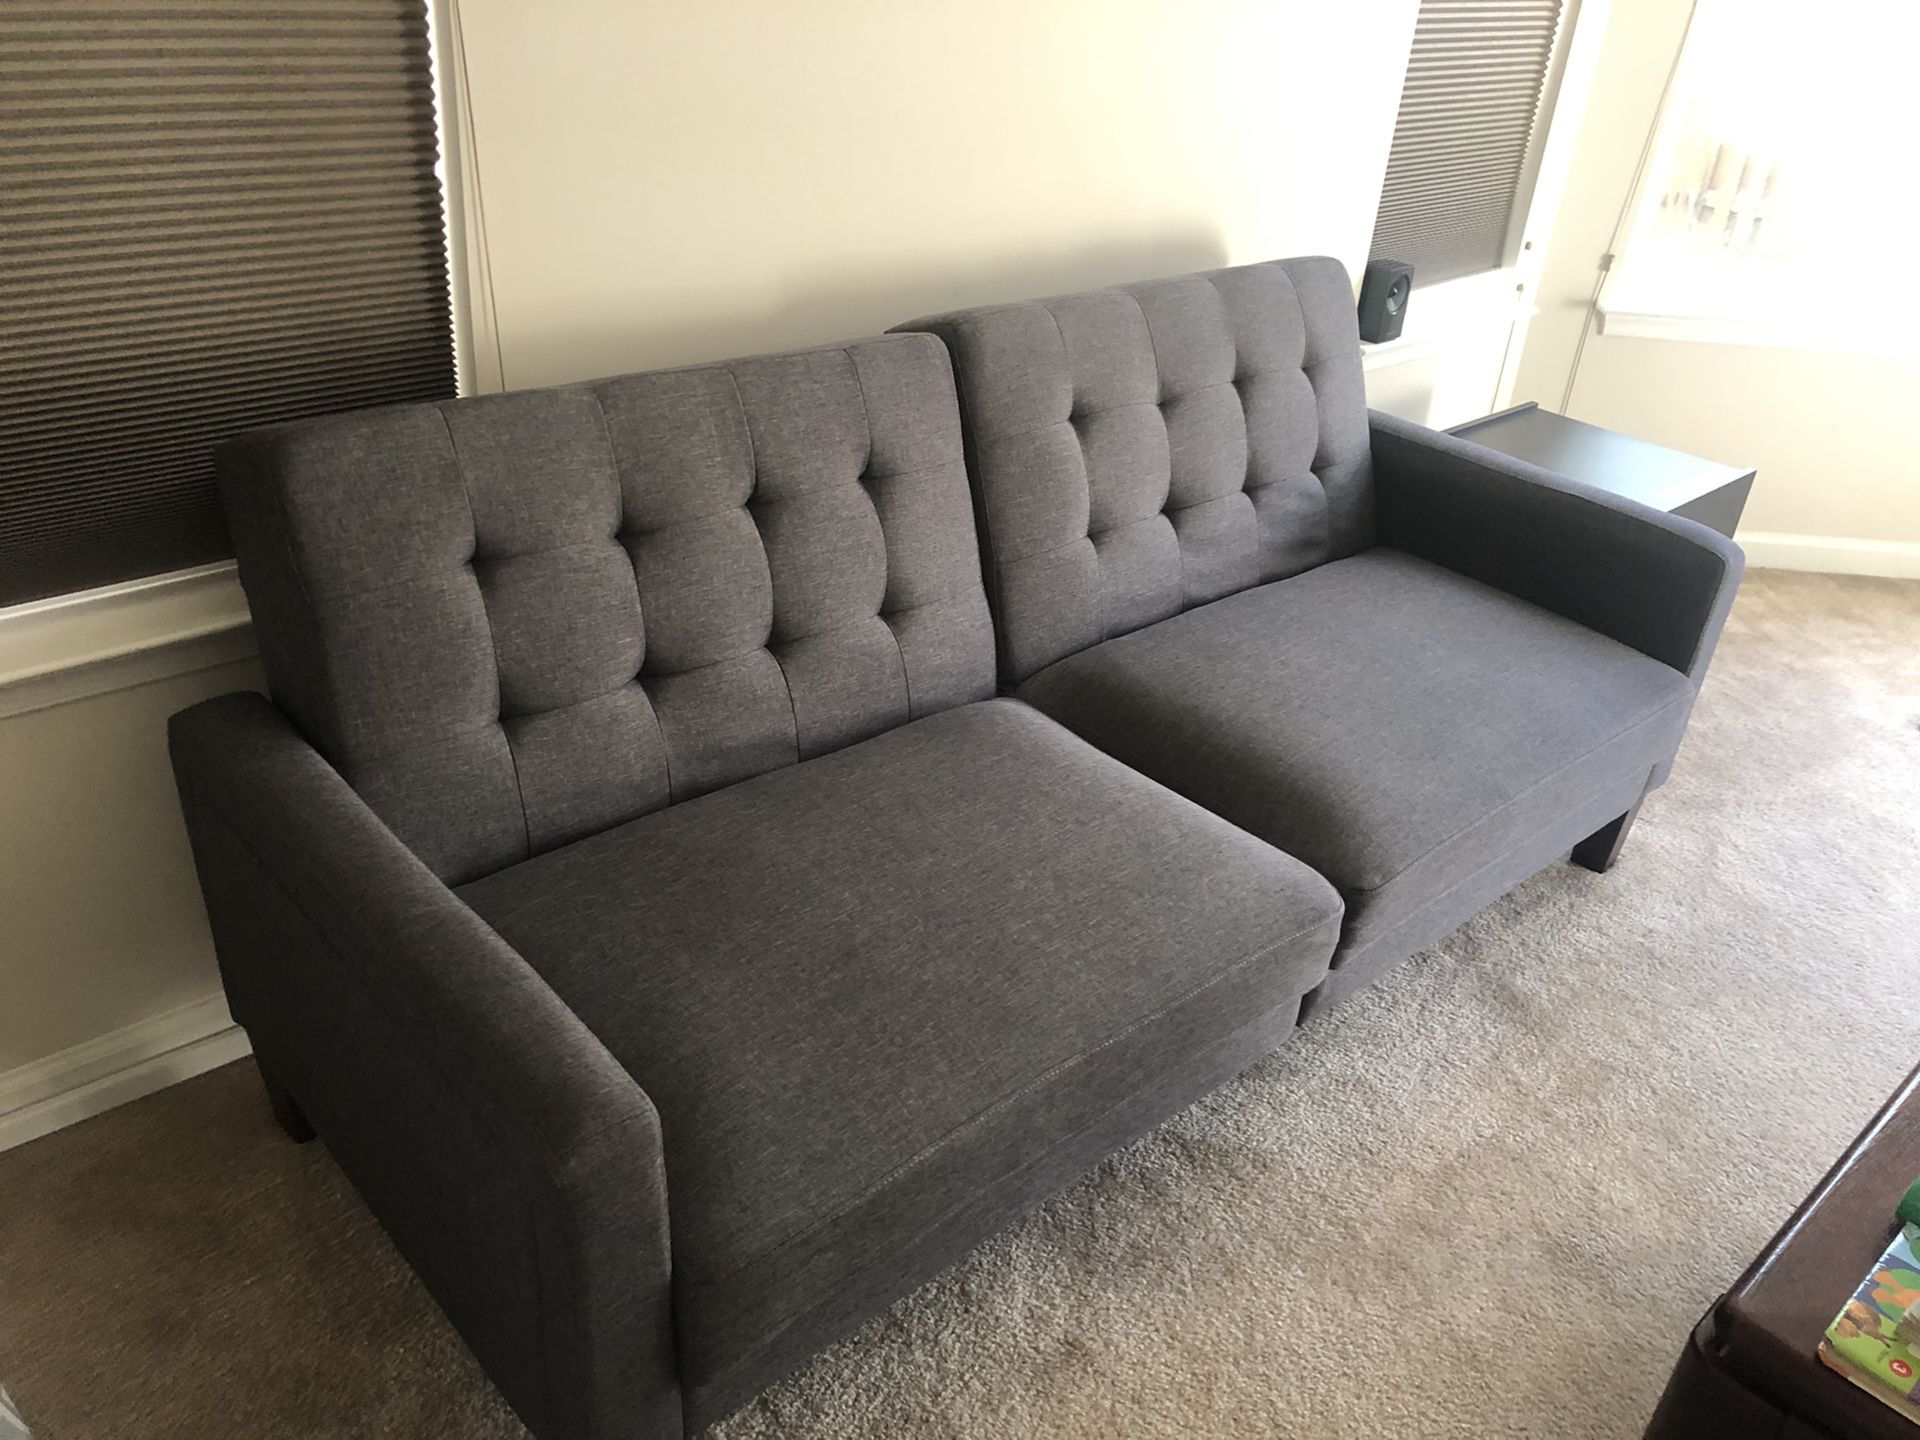 Sofa bed, coffee / side table